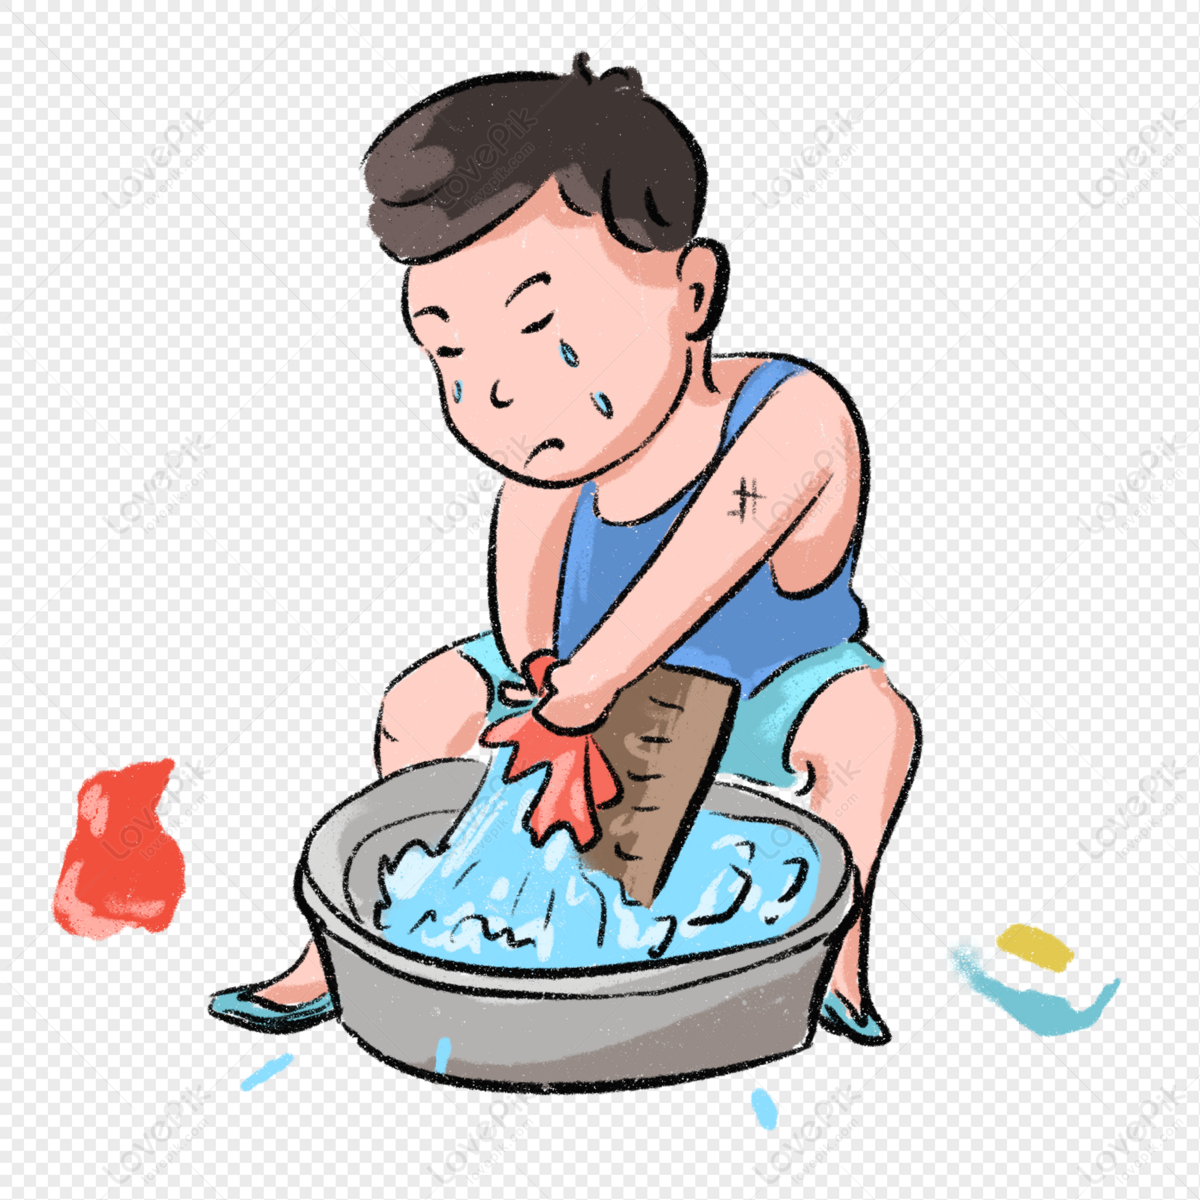 Boy Washing Clothes Cartoon Free PNG And Clipart Image For Free Download -  Lovepik | 401274569